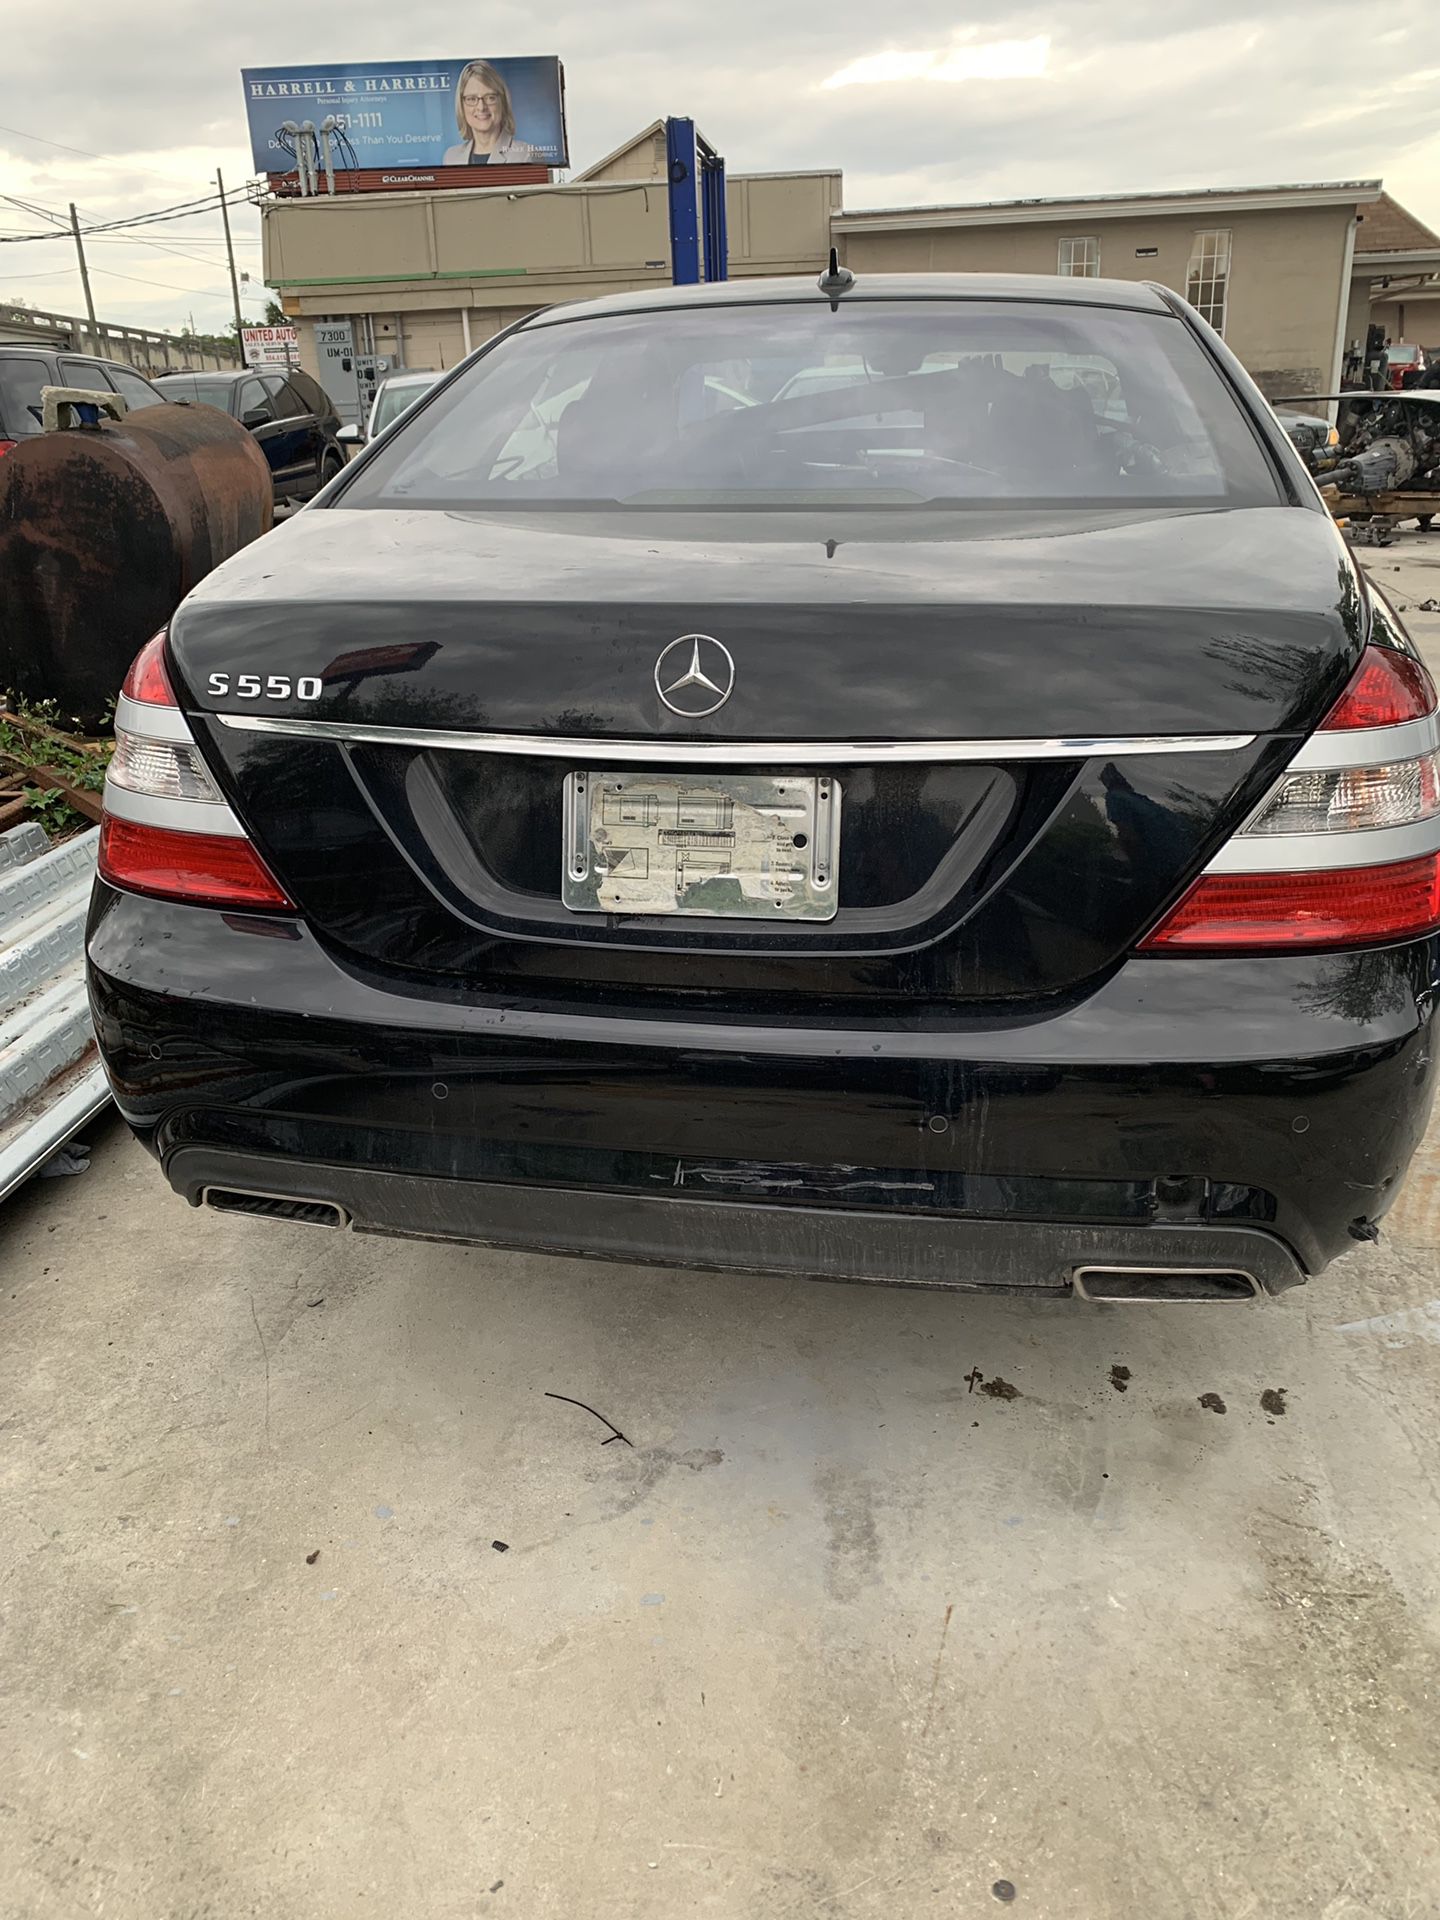 2008 Mercedes S5 50 for parts